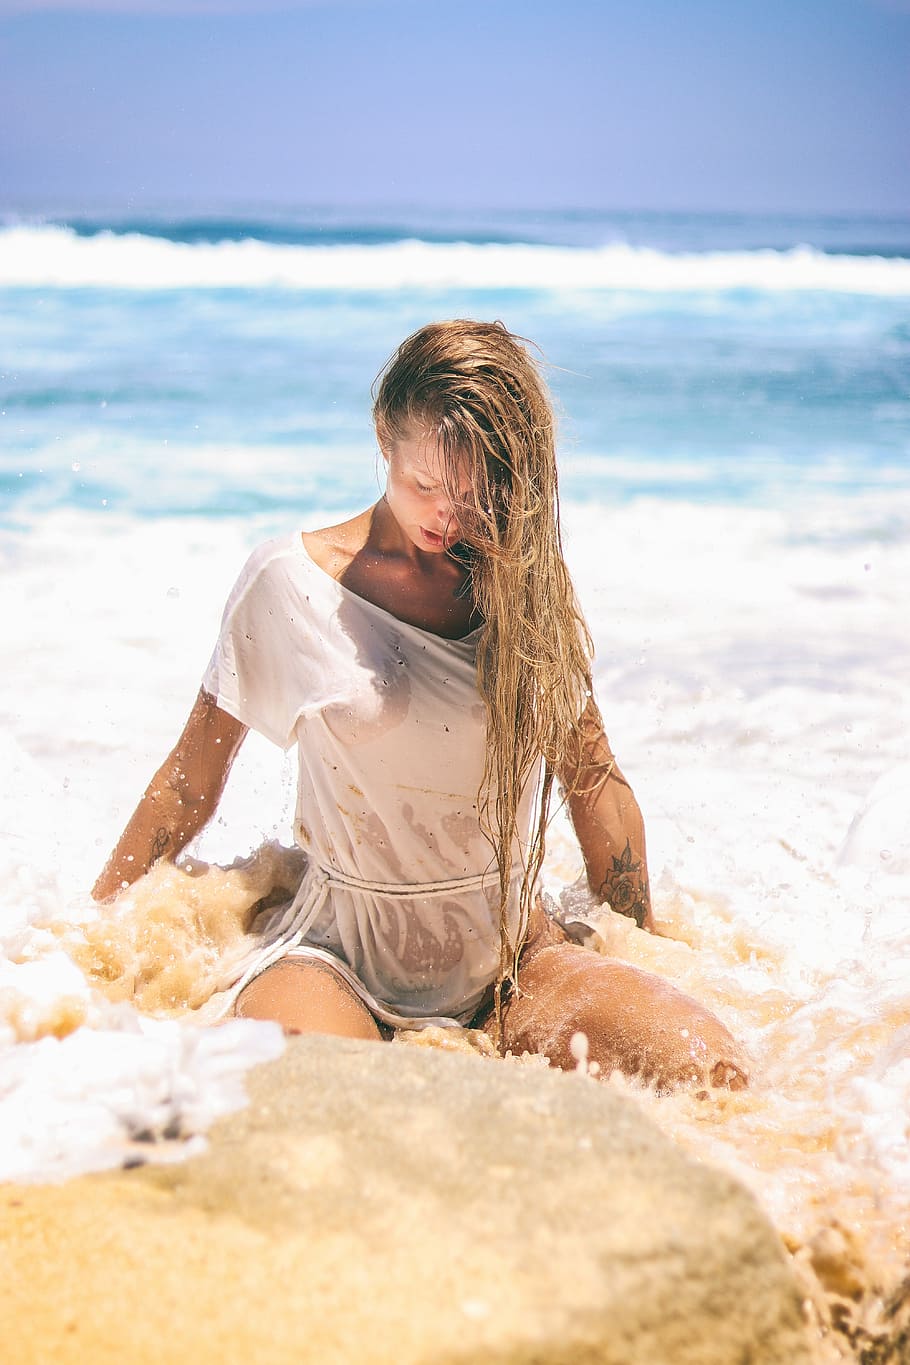 woman in white top sitting on sand near body of water, selective focus woman sitting on seashore during daytime